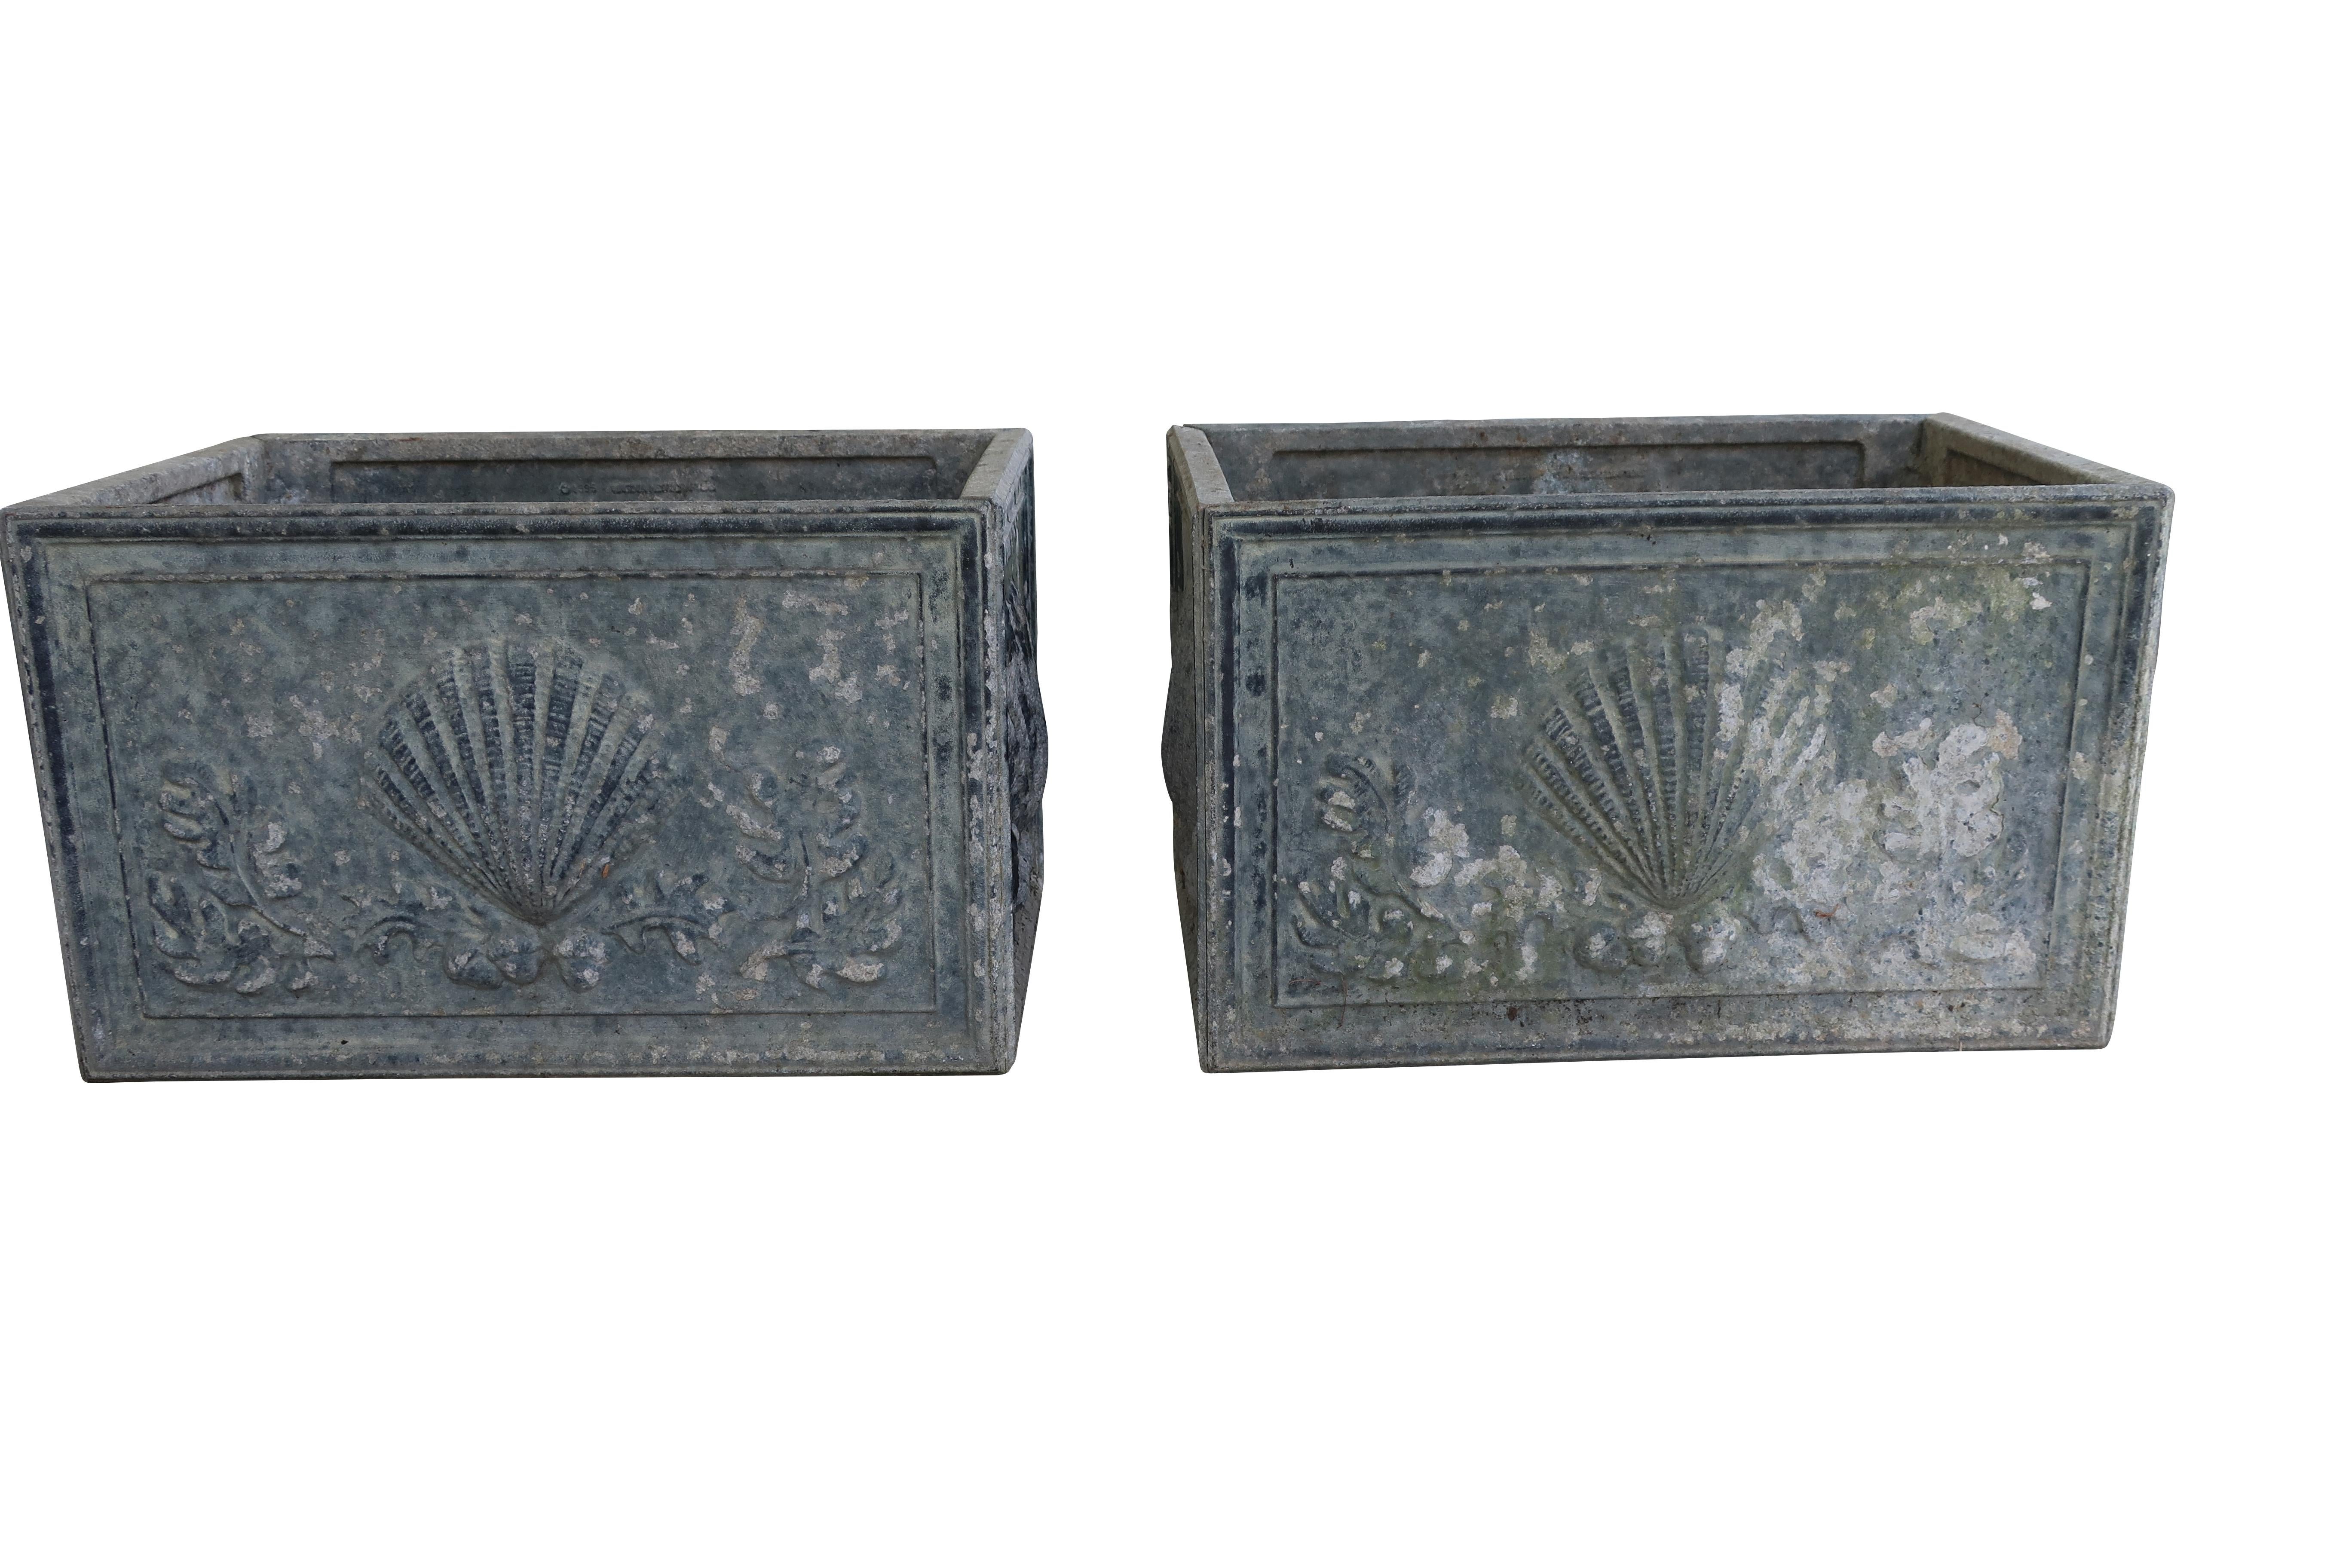 Pair of English lead planters with scallop shell motif
rectangular. 10 X 16 X 10 inches 